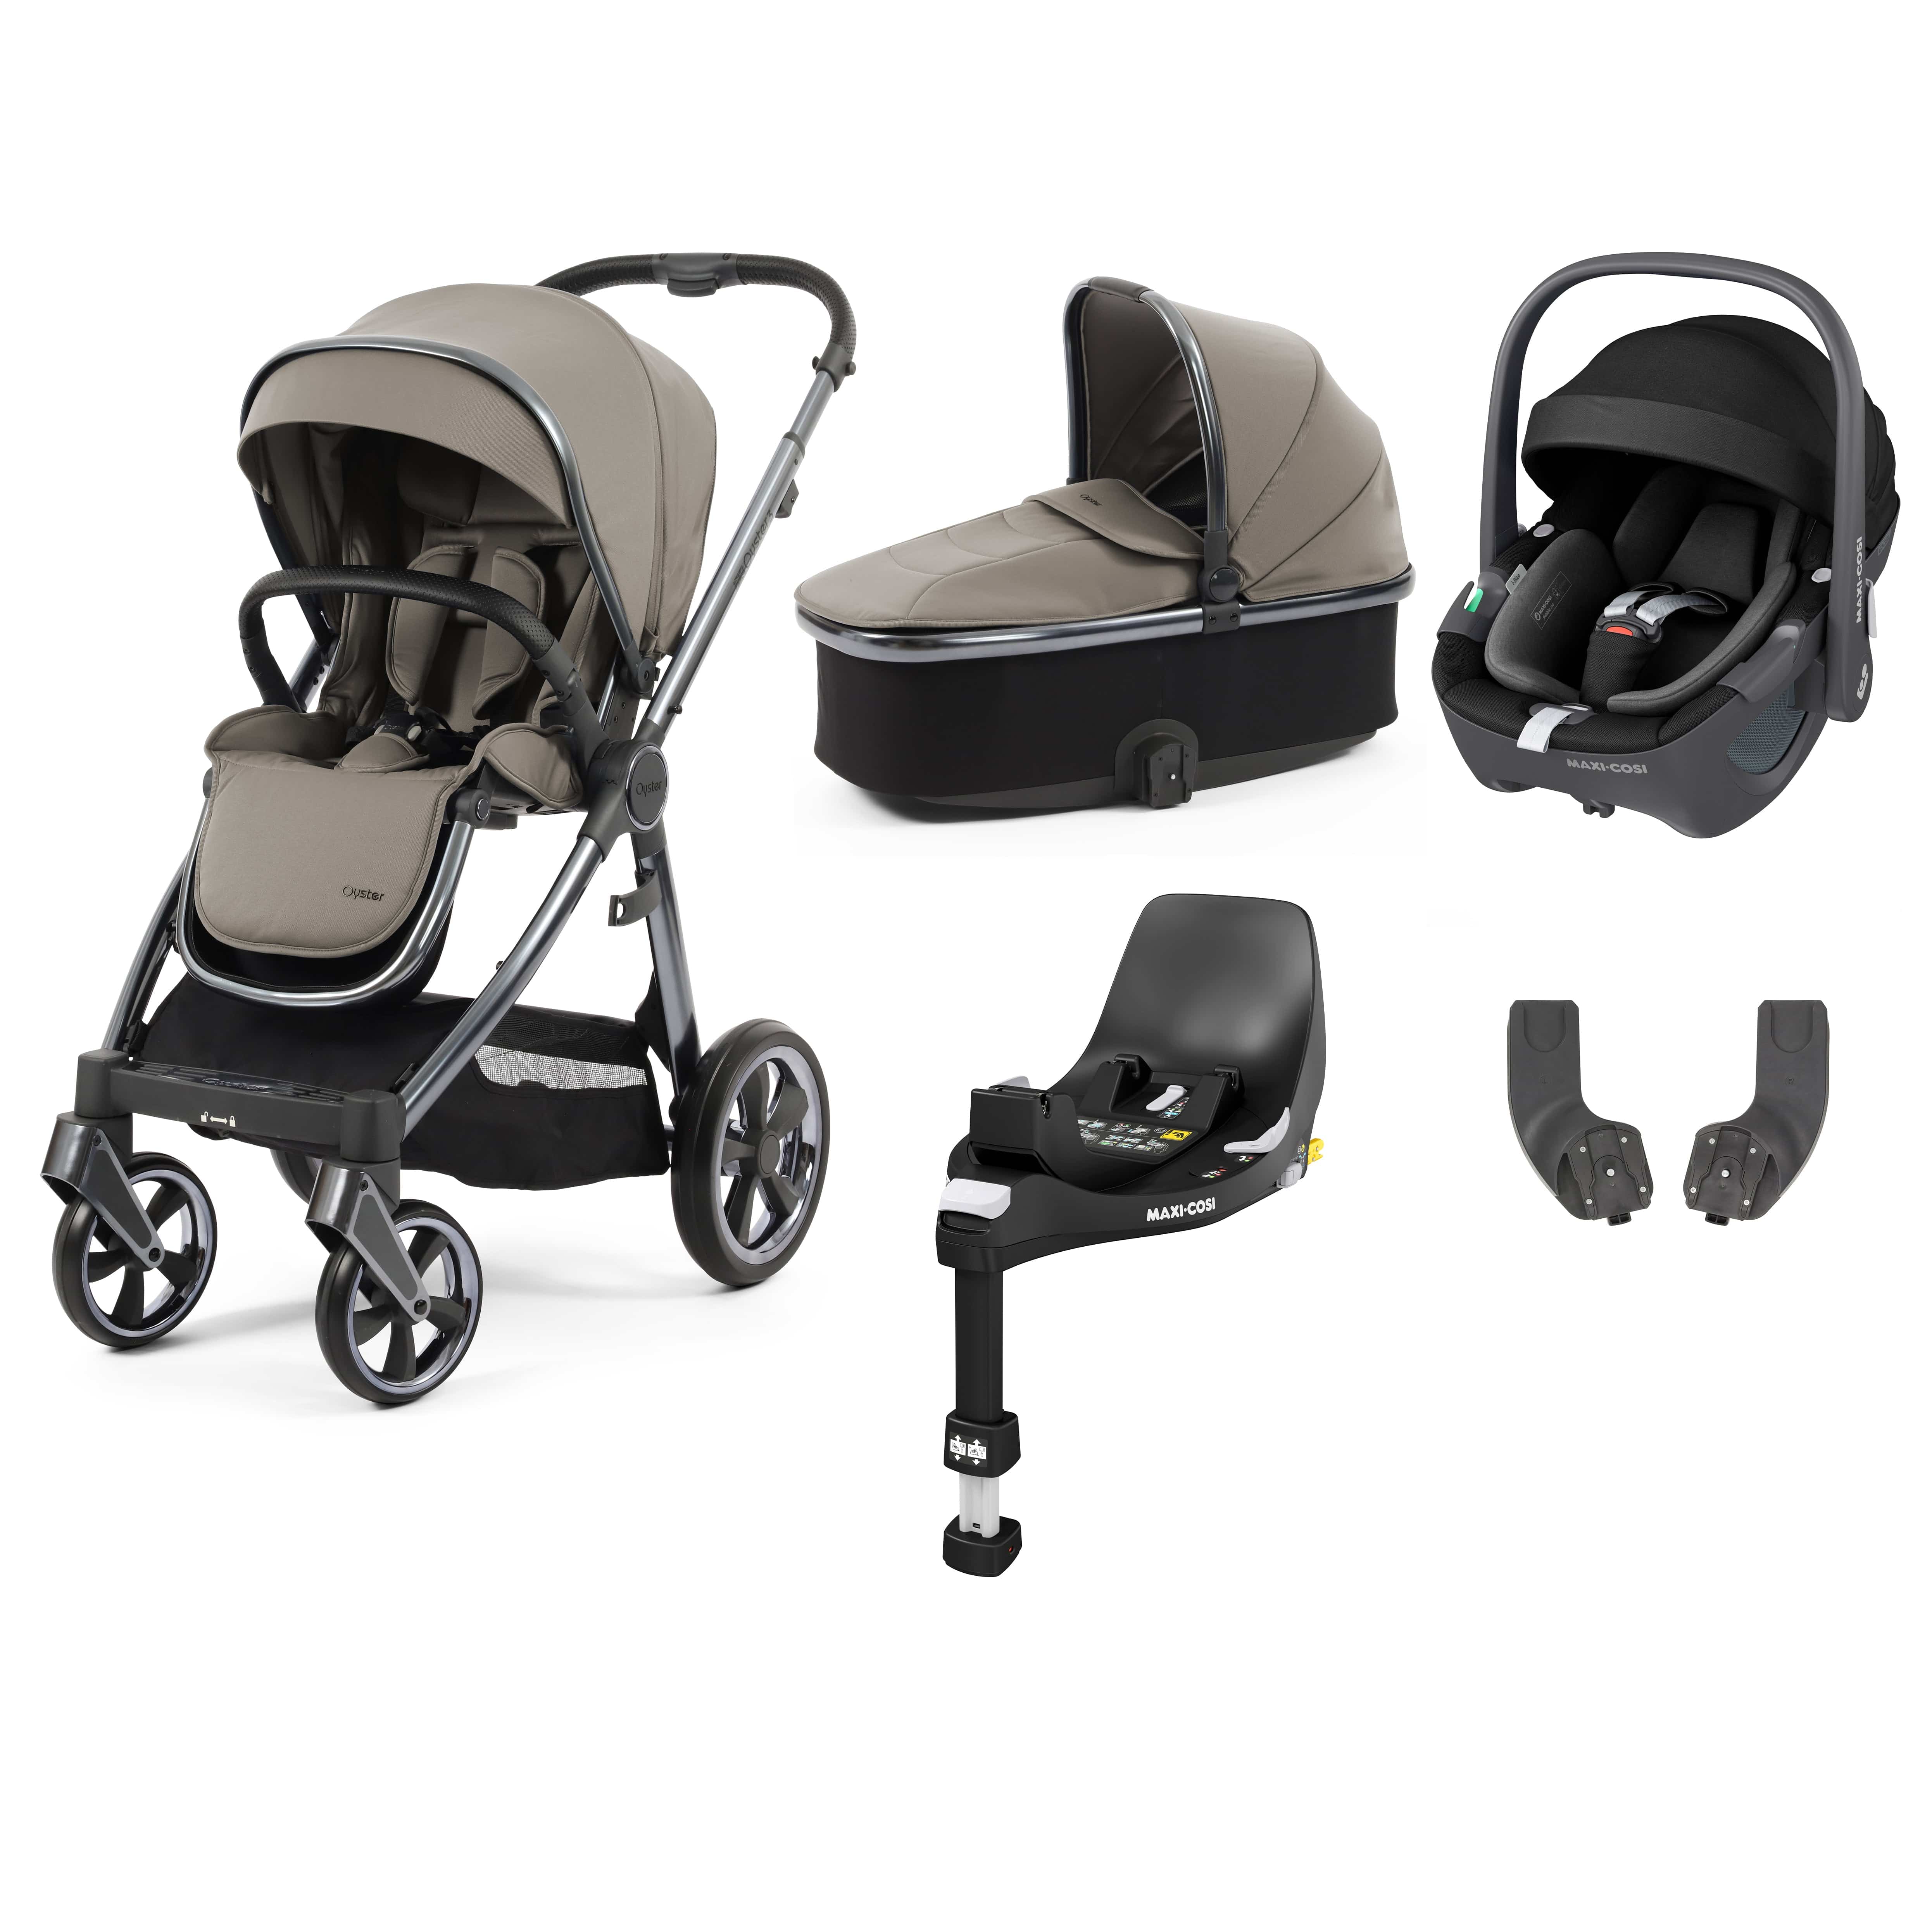 Babystyle Oyster 3 Essential Bundle with Car Seat in Stone Travel Systems 14760-STN 5060711567259